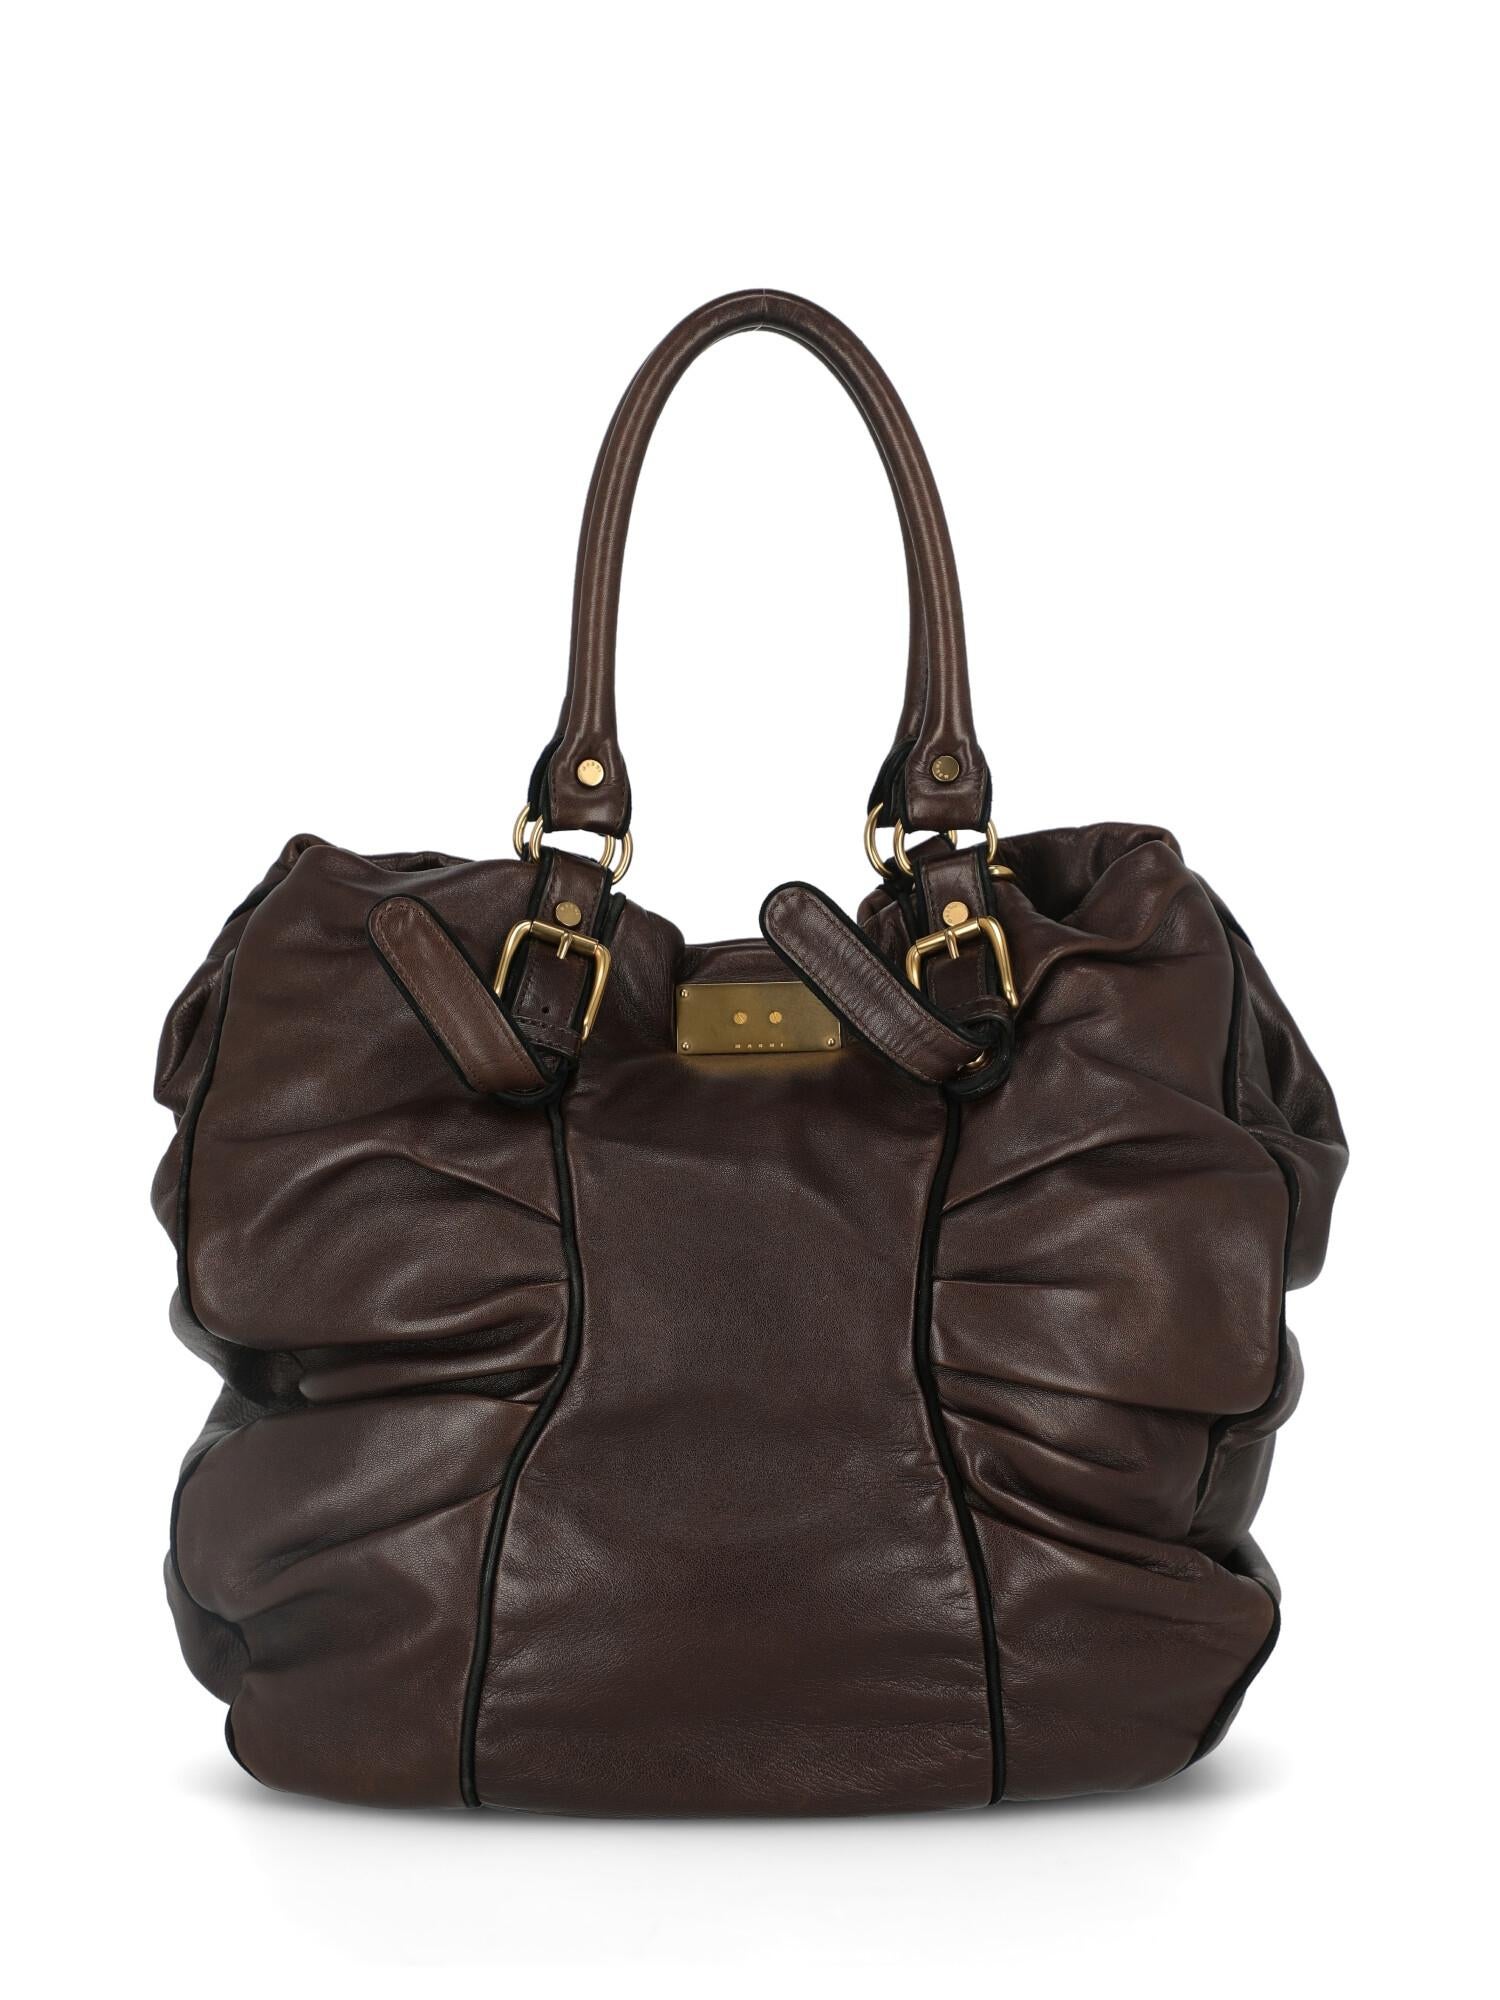 Marni Woman Handbag Brown Leather In Good Condition For Sale In Milan, IT